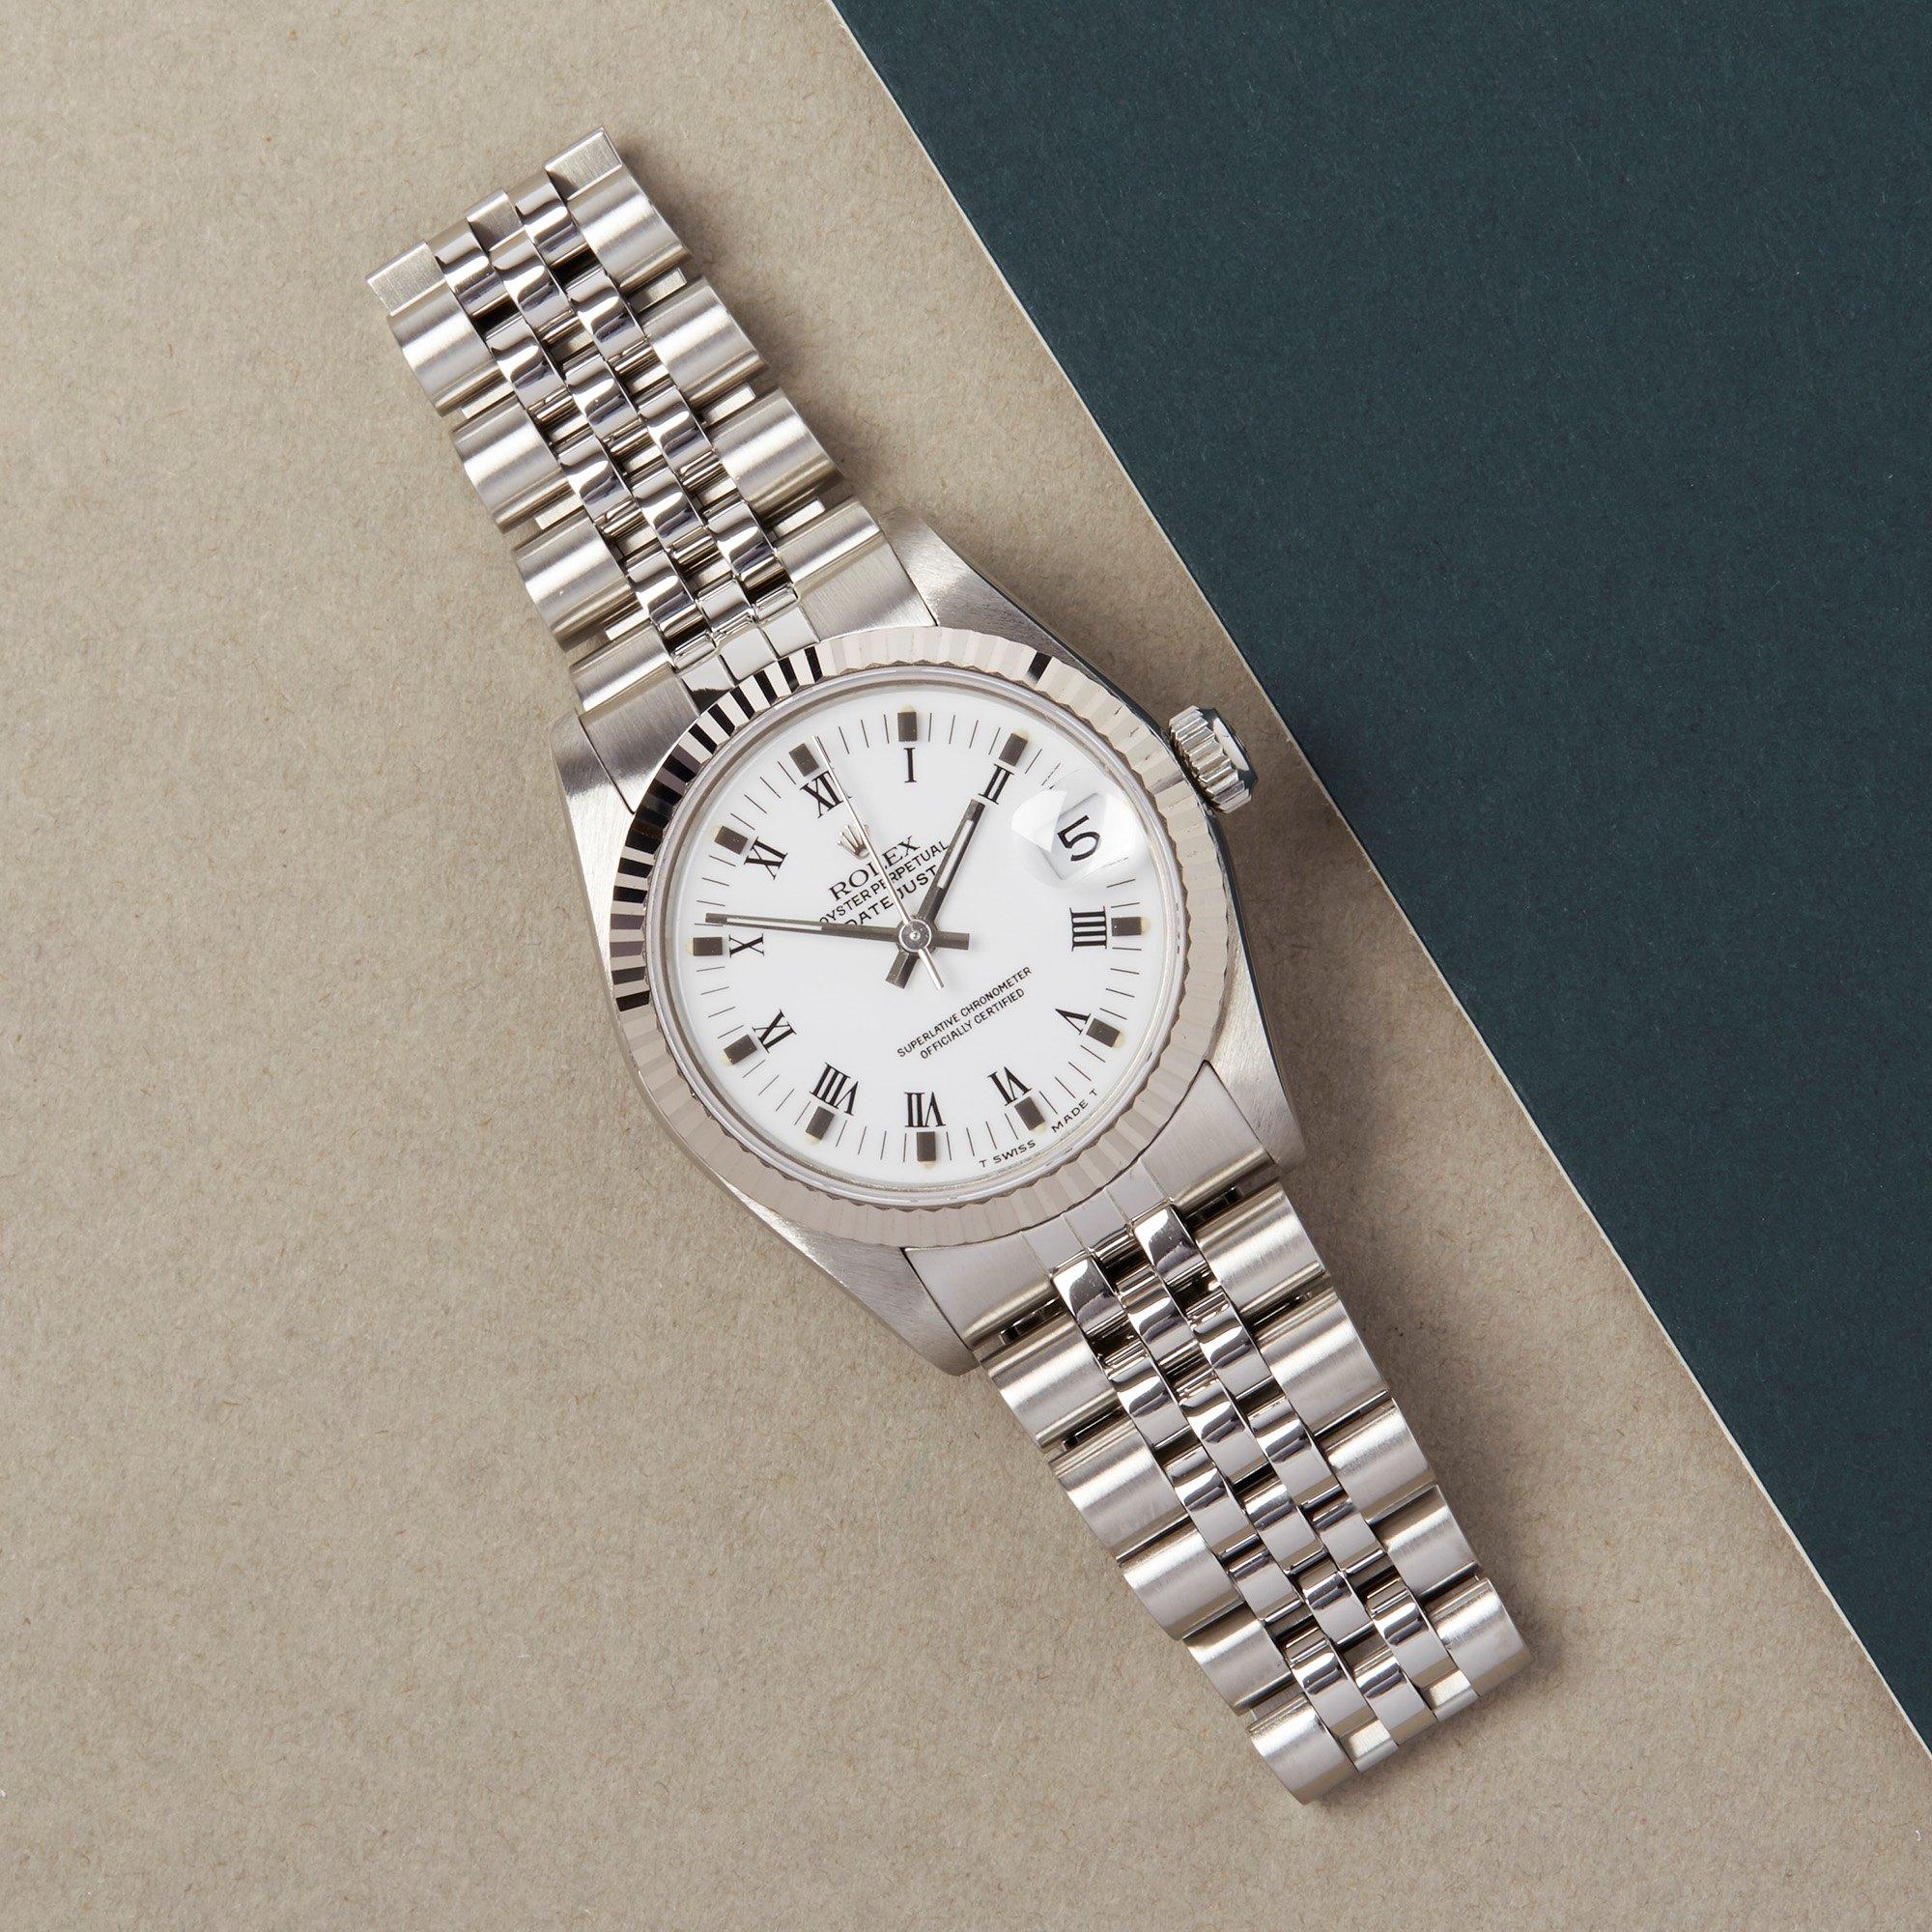 Xupes Reference: W007624
Manufacturer: Rolex
Model: Datejust
Model Variant: 31
Model Number: 68274
Age: 1990
Gender: Ladies
Complete With: Rolex Box 
Dial: White Roman
Glass: Sapphire Crystal
Case Size: 31mm
Case Material: Stainless Steel & White